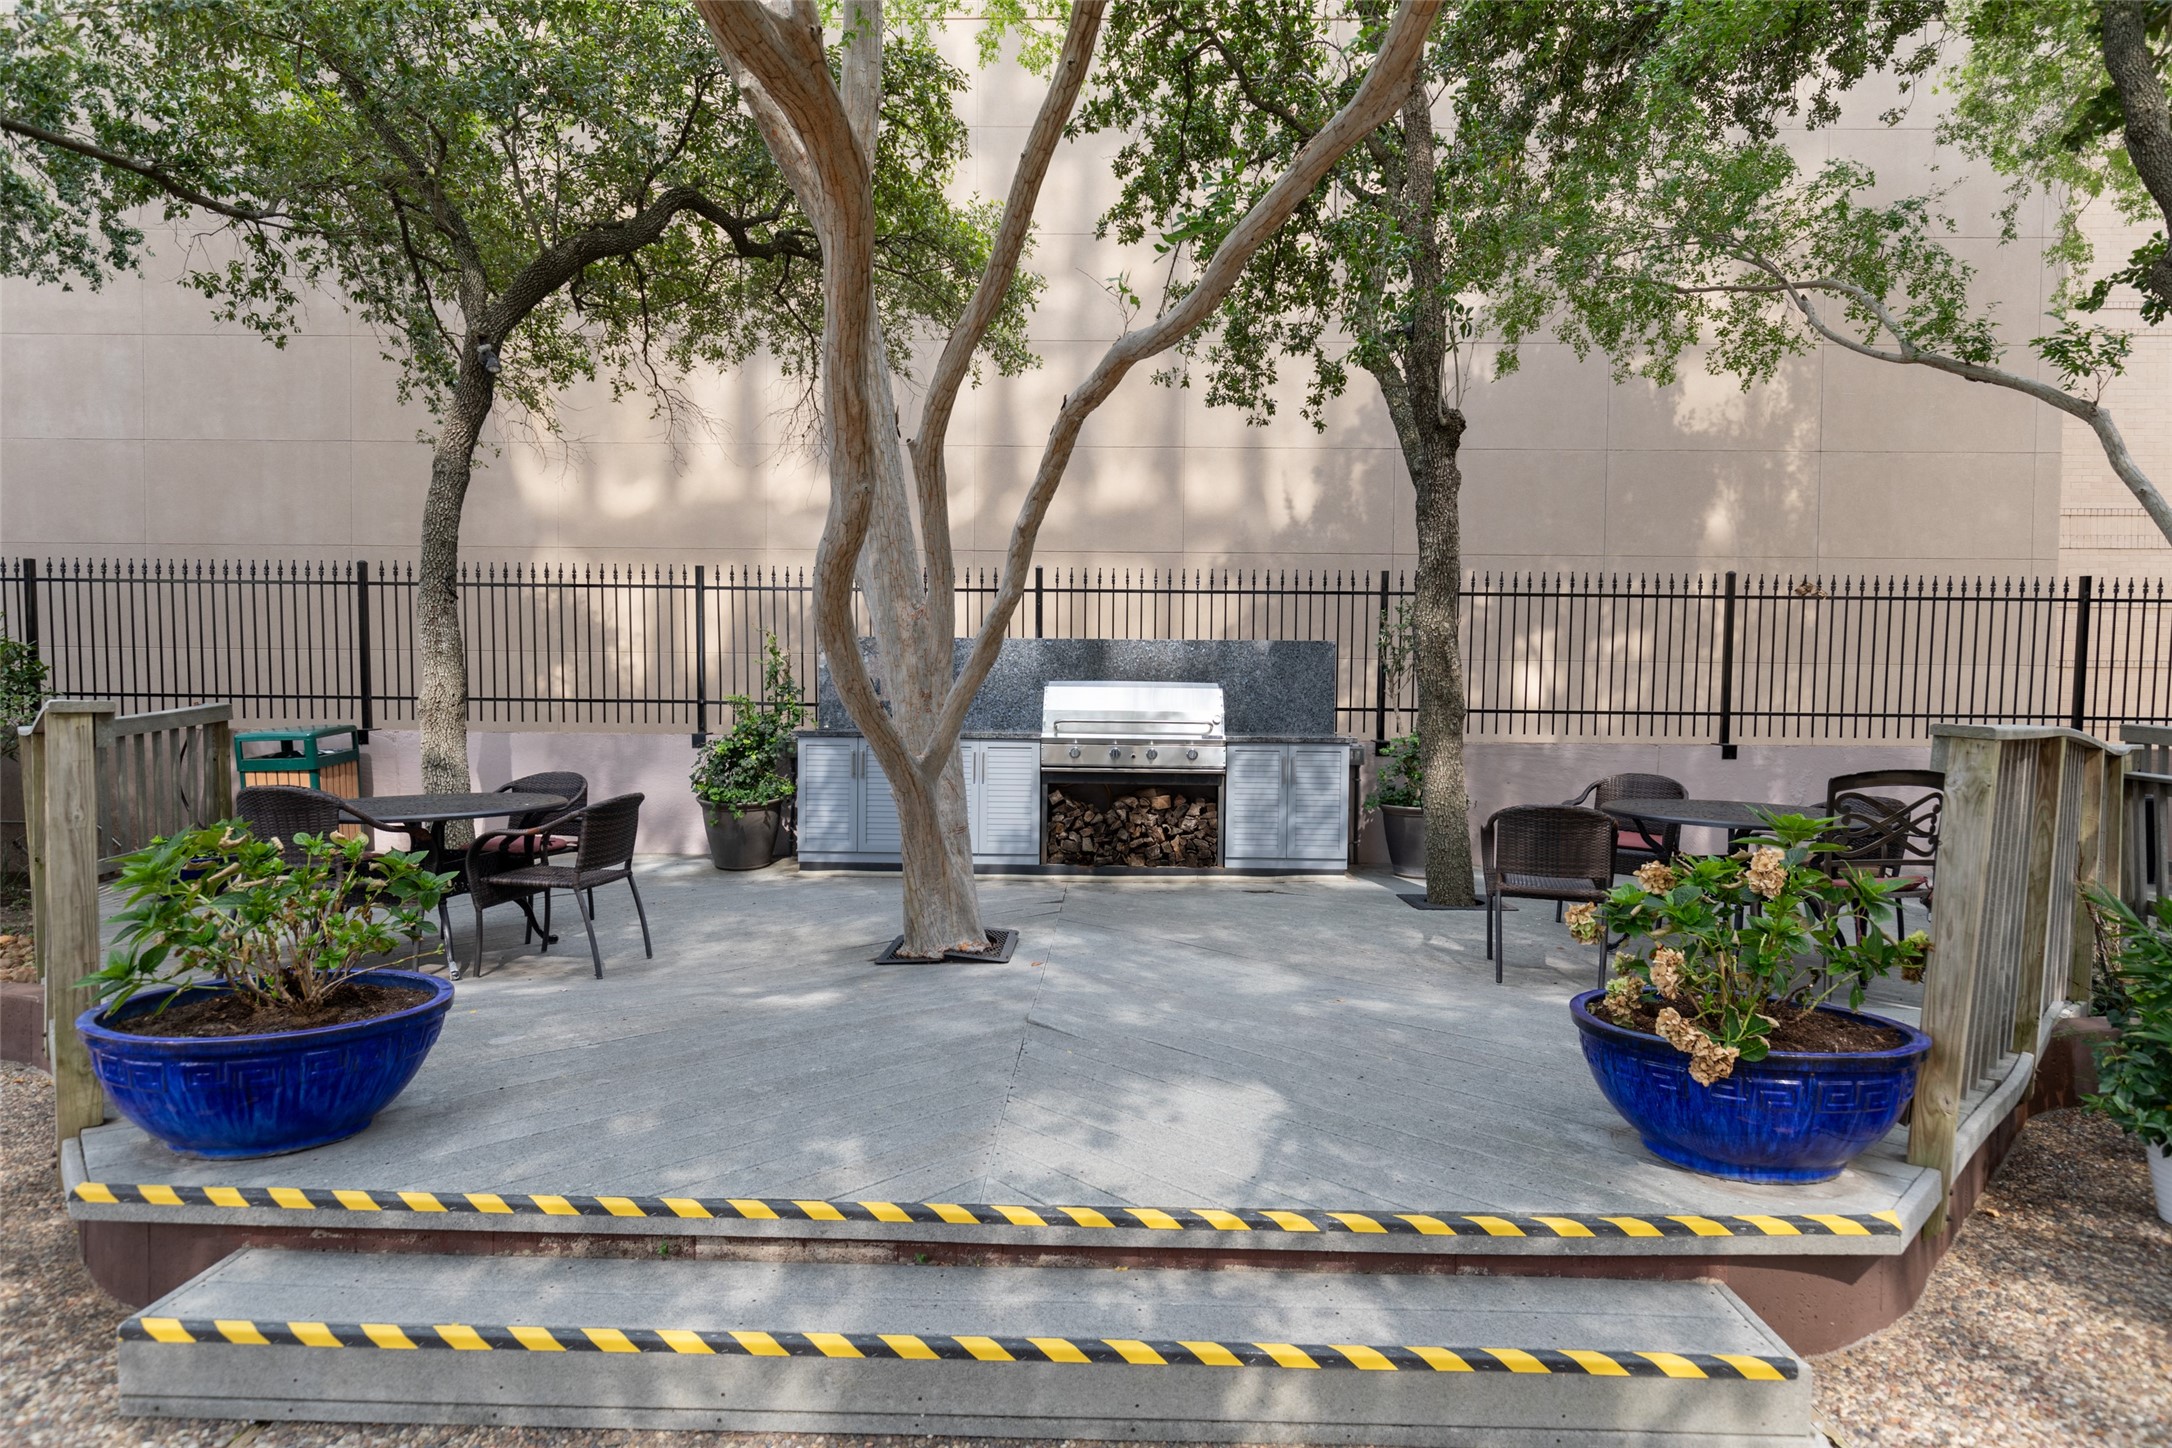 Adjacent to the pool, the summer kitchen area boasts barbecue stations, outdoor seating, and lush greenery, making it the perfect setting for alfresco dining and casual get-togethers.